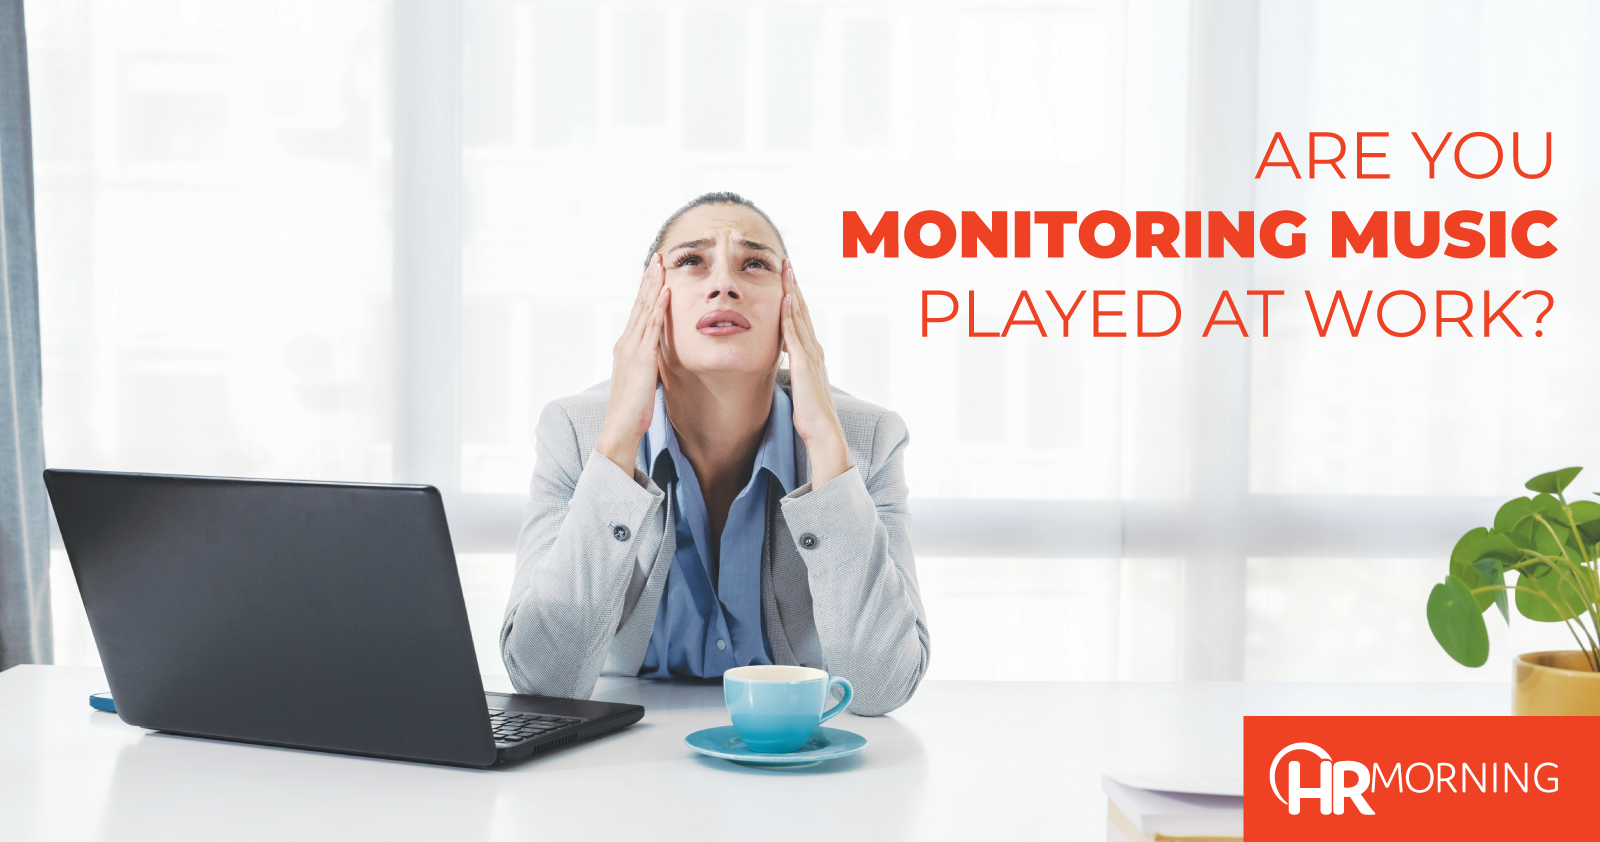 Are you monitoring music played at work?